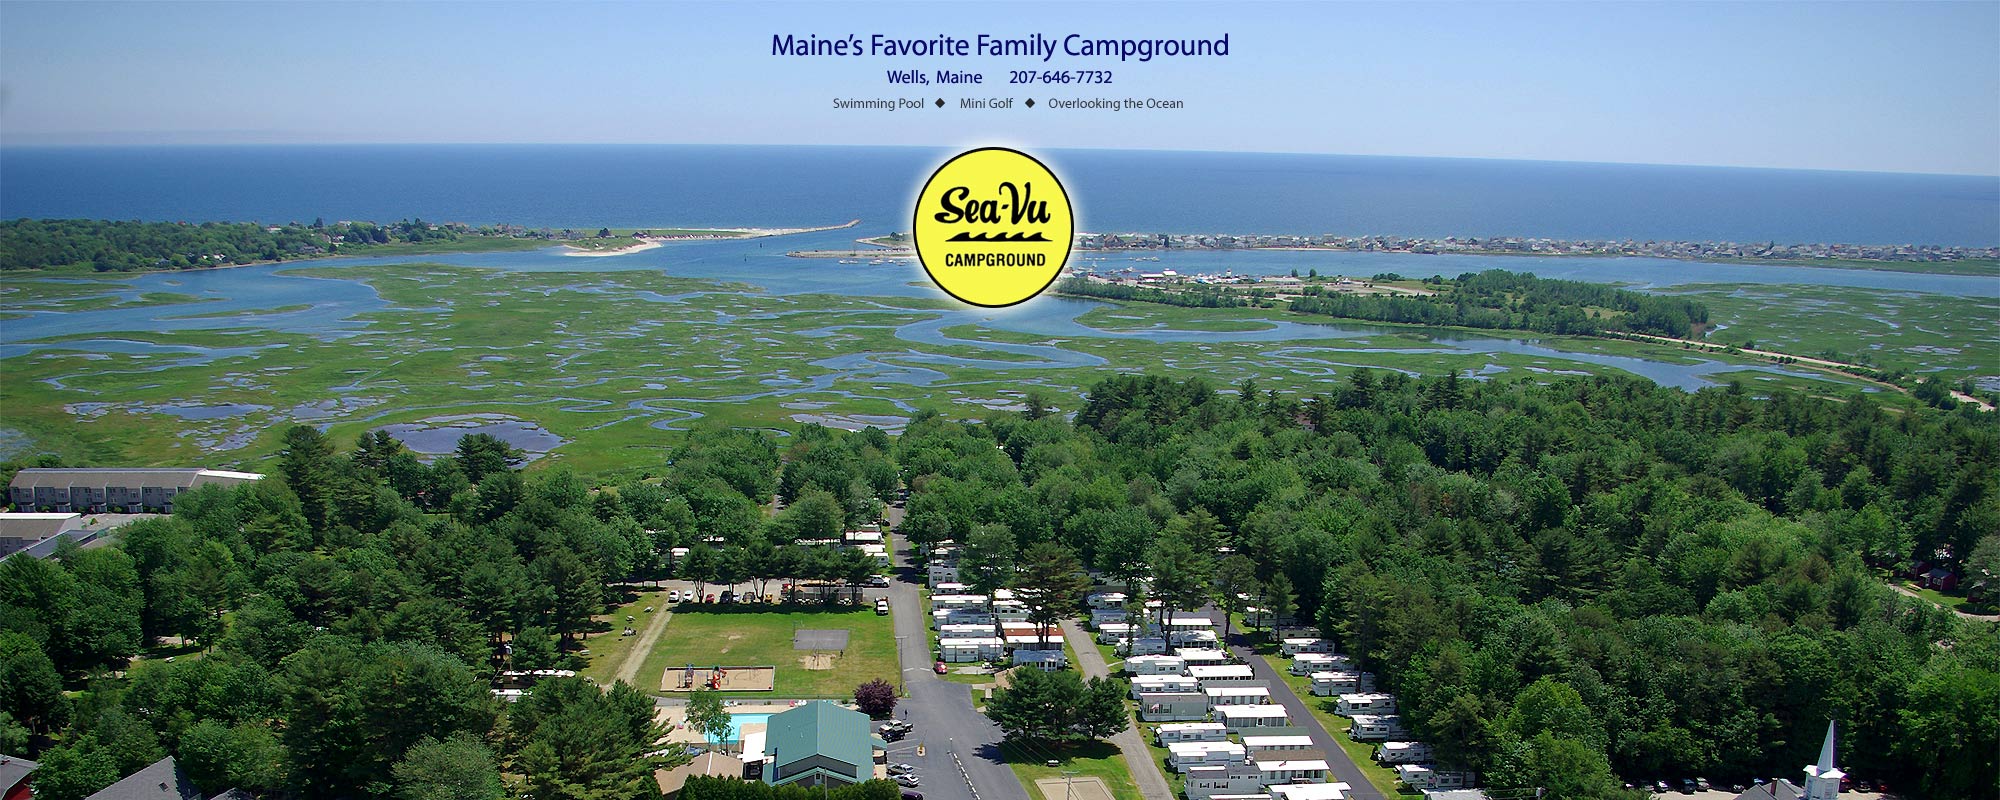 Sea-Vu Campground of Wells, Maine, Family Camping in Maine at its best